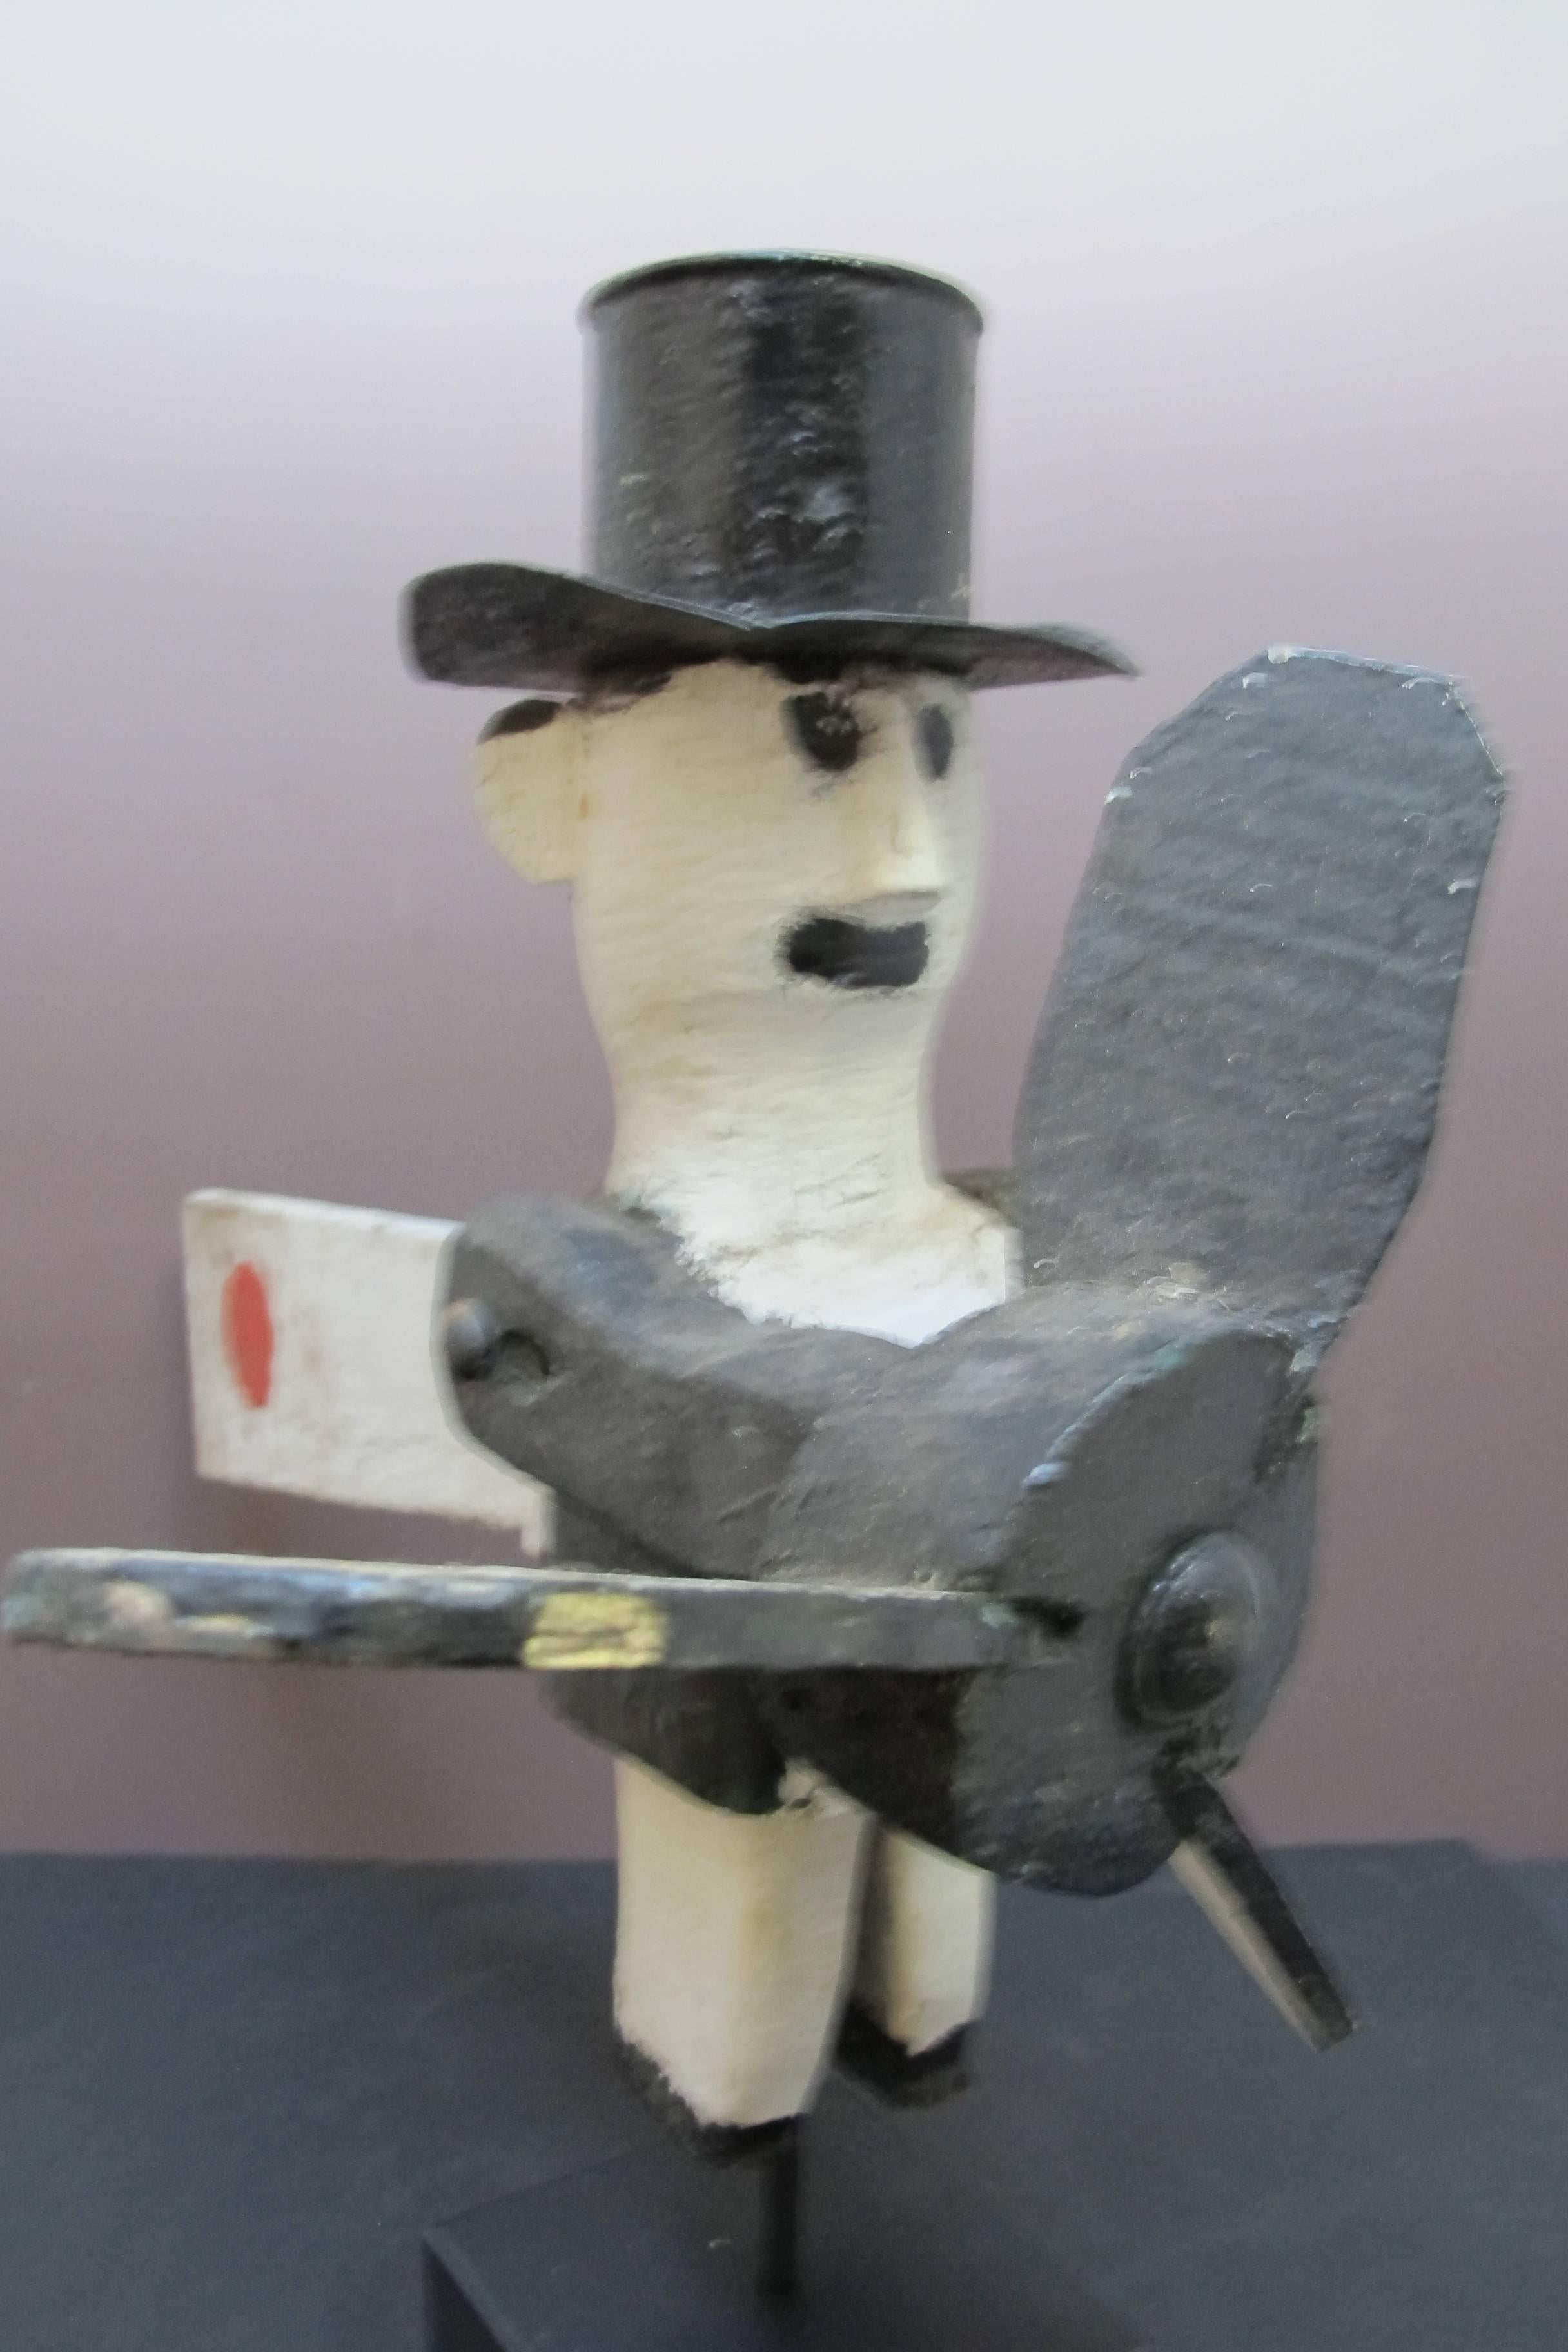 Unusual whirligig figure of a man with a tin top hat. The whirligig has one arm to the side and one extended forward holding a propeller. From the back a long wood tail extends with a painted red dot. The figure shows earlier paint with a great